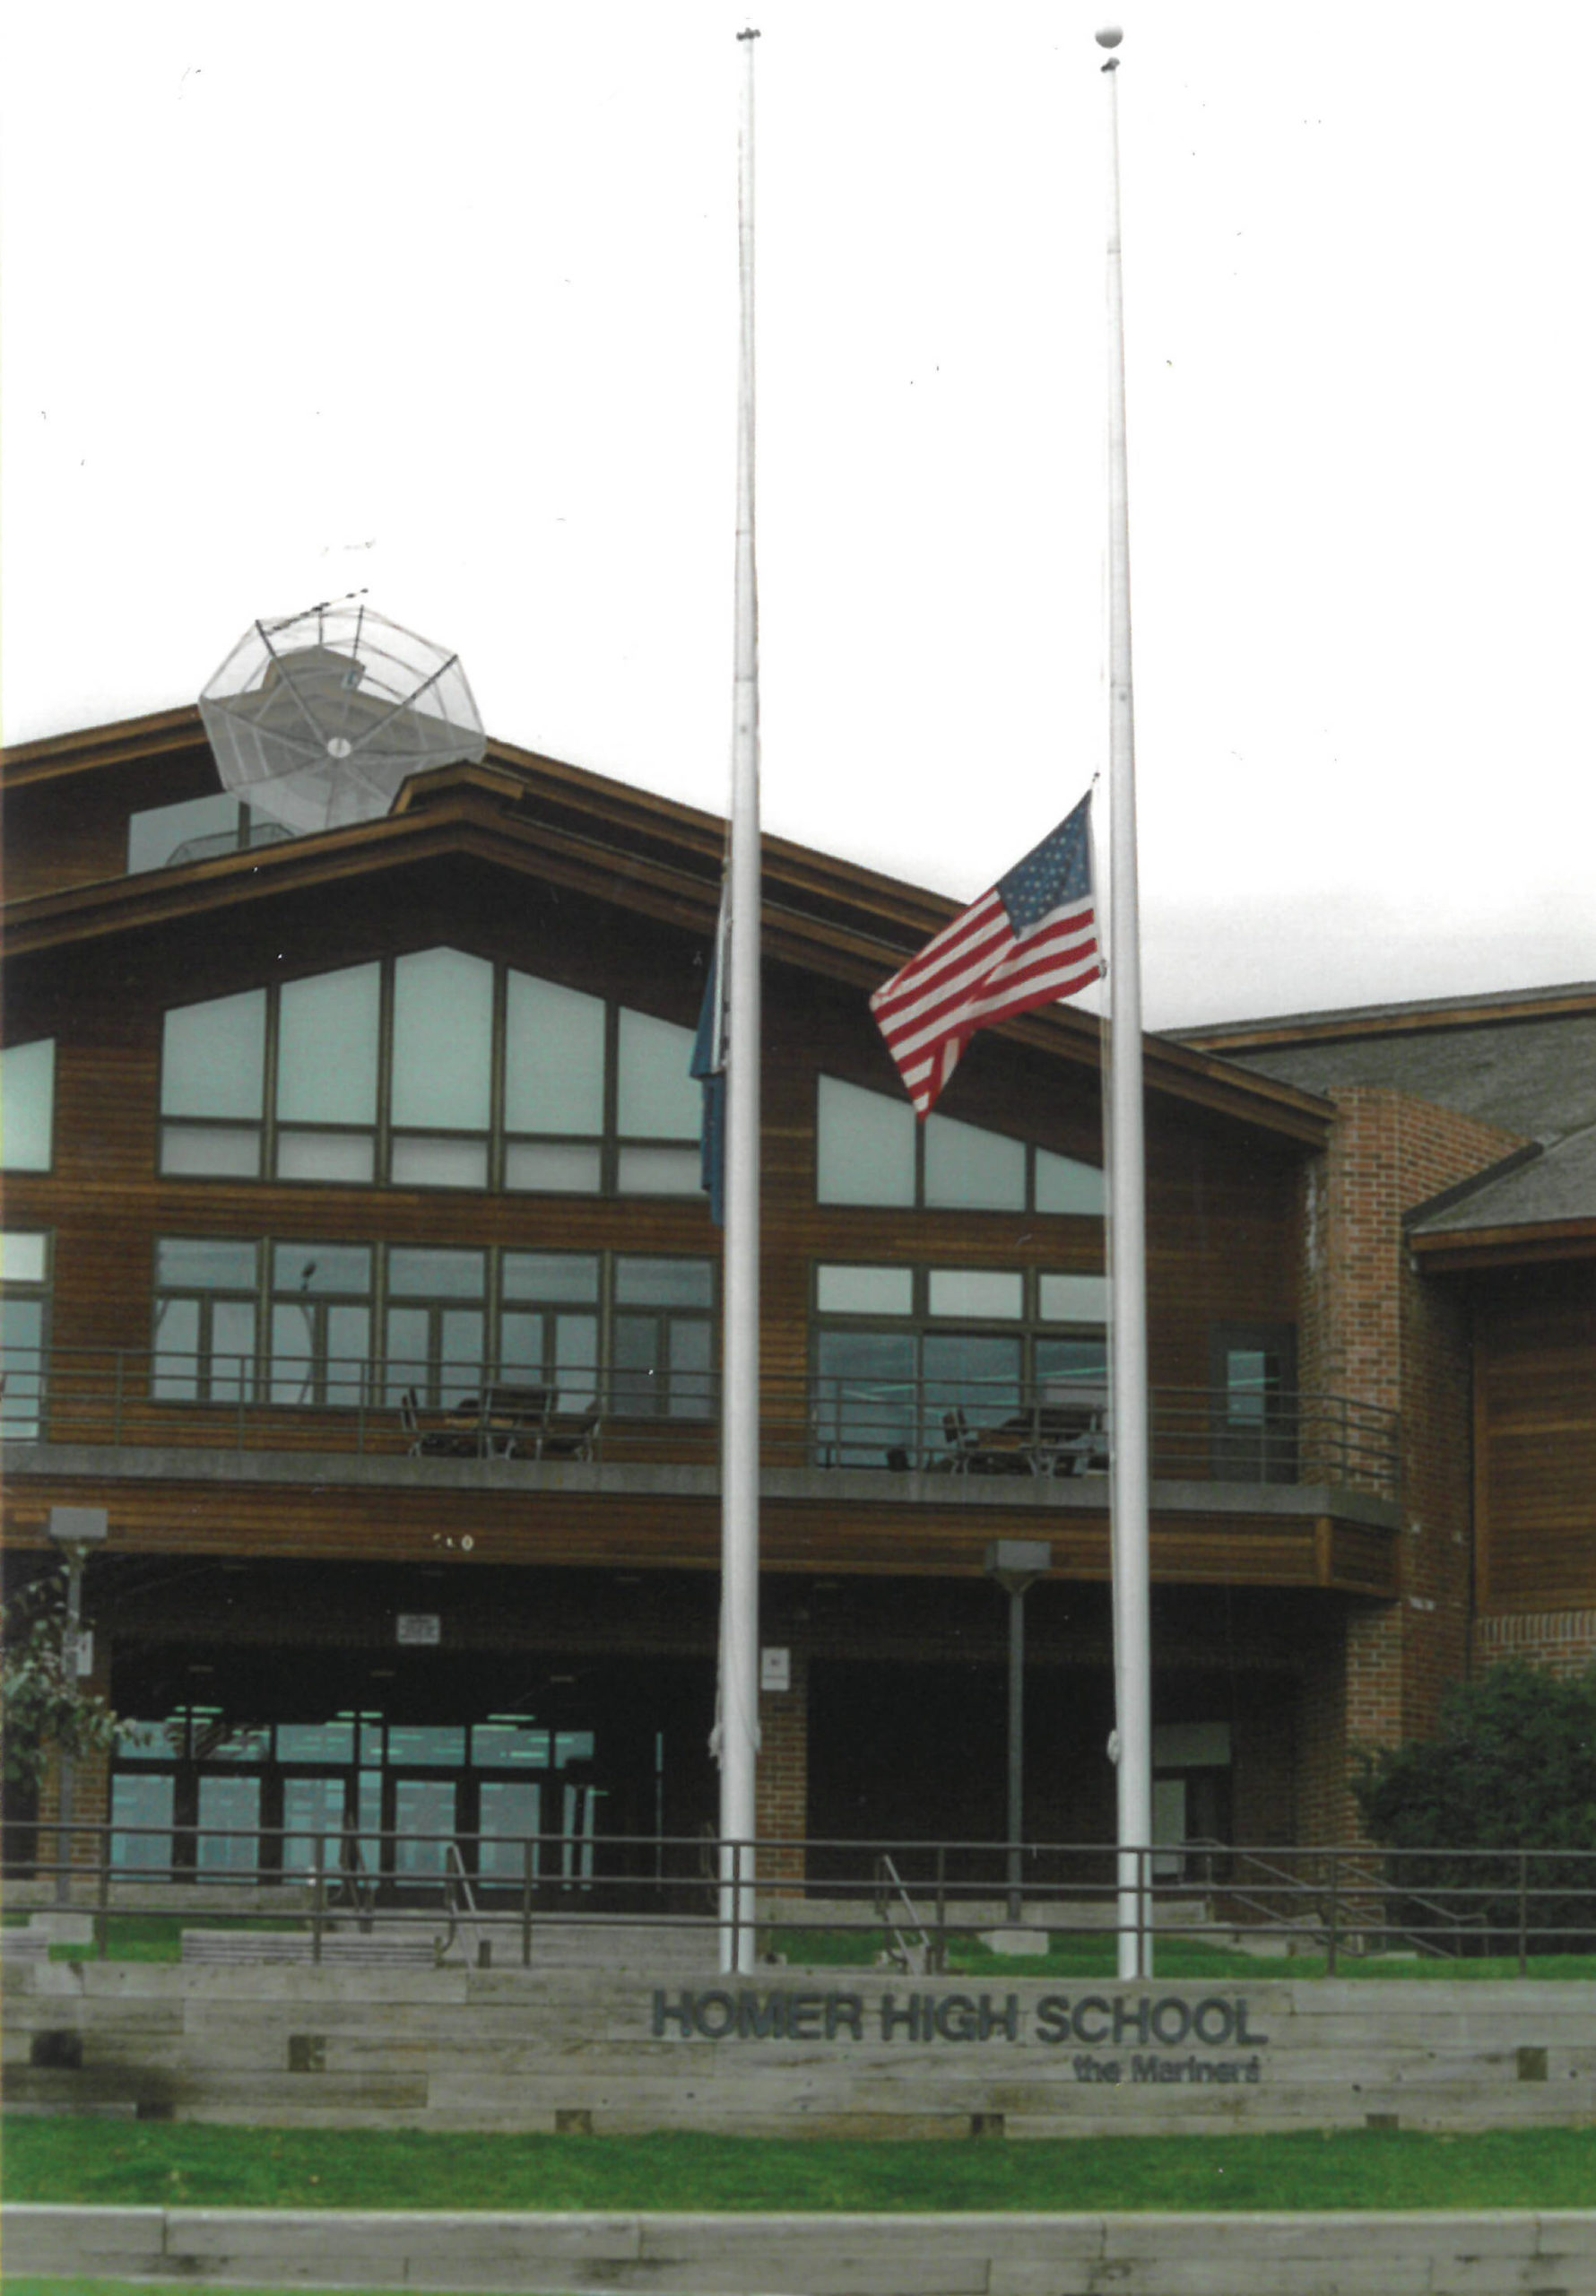 Flags fly at half-staff in front of Homer High School on Sept. 11, 2001, in memory of the victims of the attacks in New York, Washington, D.C., and in the air over Pennsylvania. (Homer News file photo)